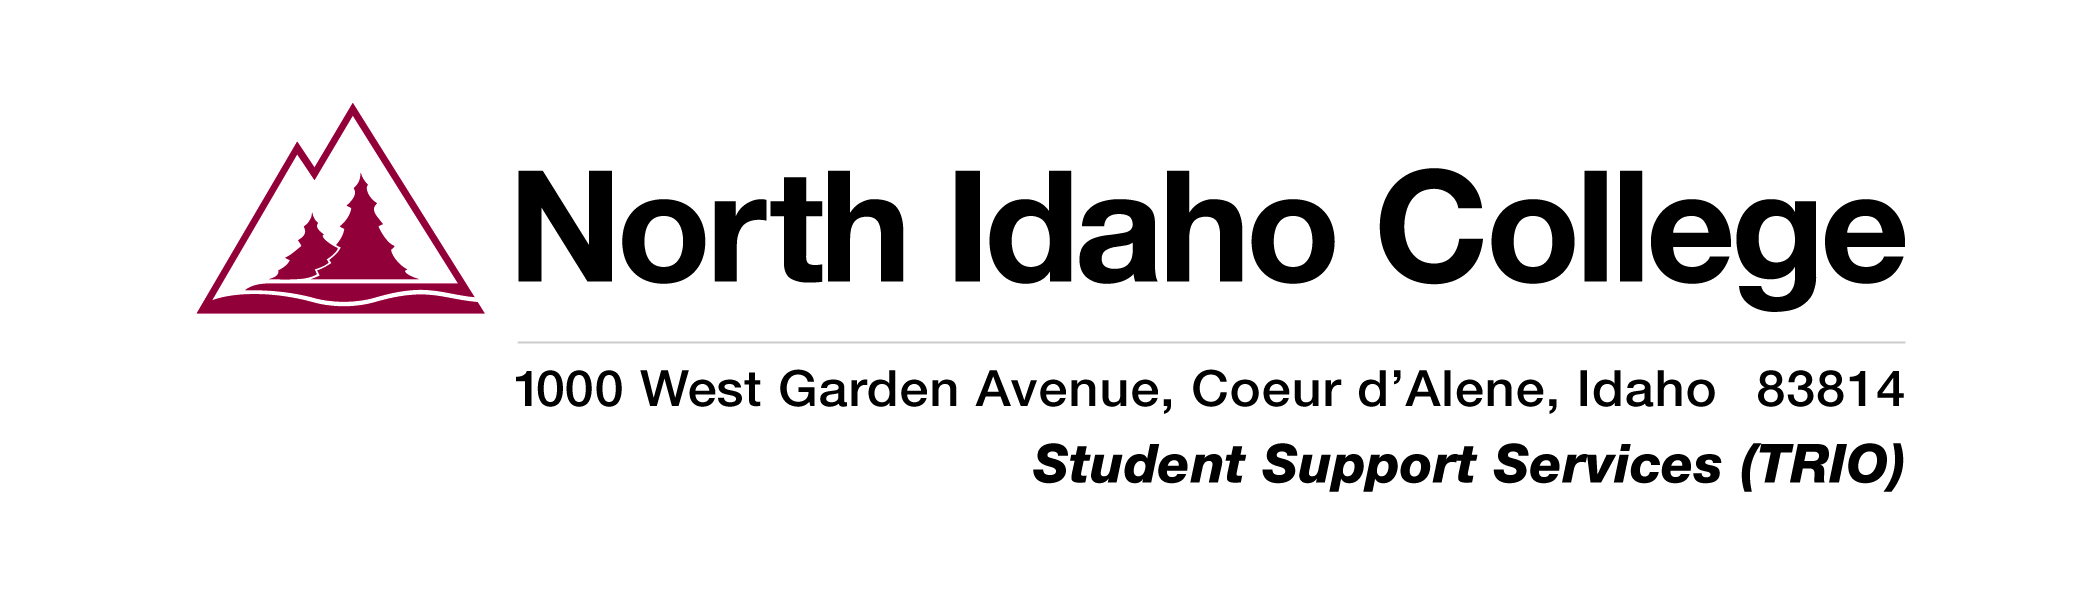 NIC Logo with Student Support TRIO department and address